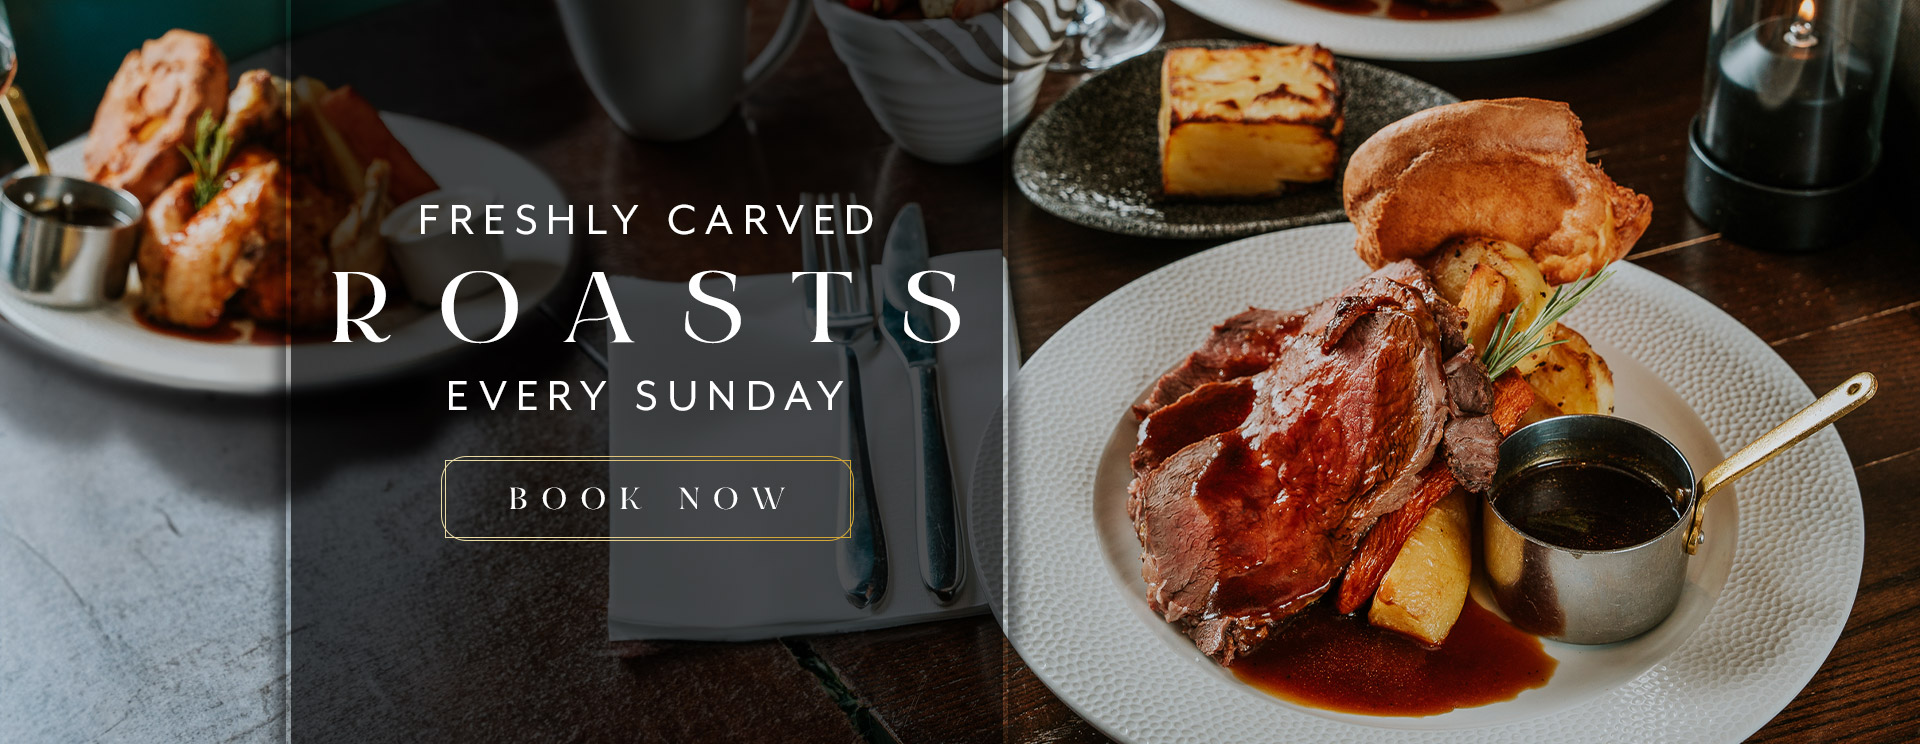 Sunday Lunch at The Derby Arms